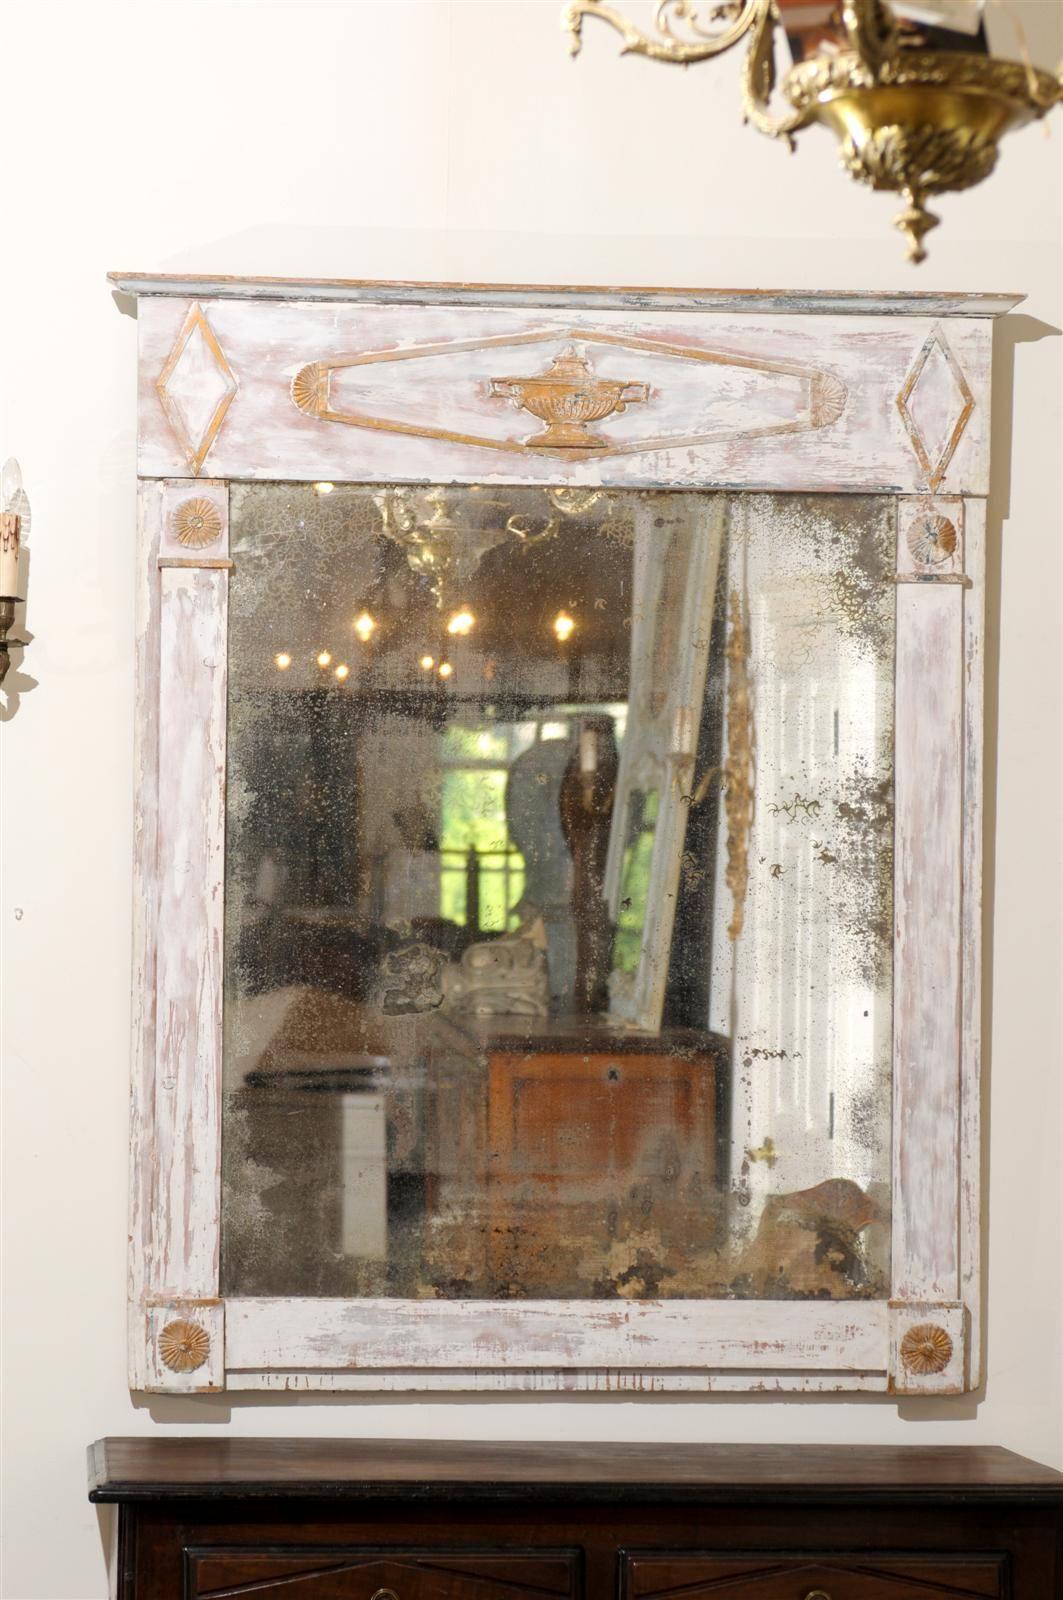 A French period Directoire trumeau mirror from the late 18th century with gilded accents, carved urn, distressed paint and mirror. This French Directoire mirror features an elegant linear Silhouette. The light colored distressed paint finish is